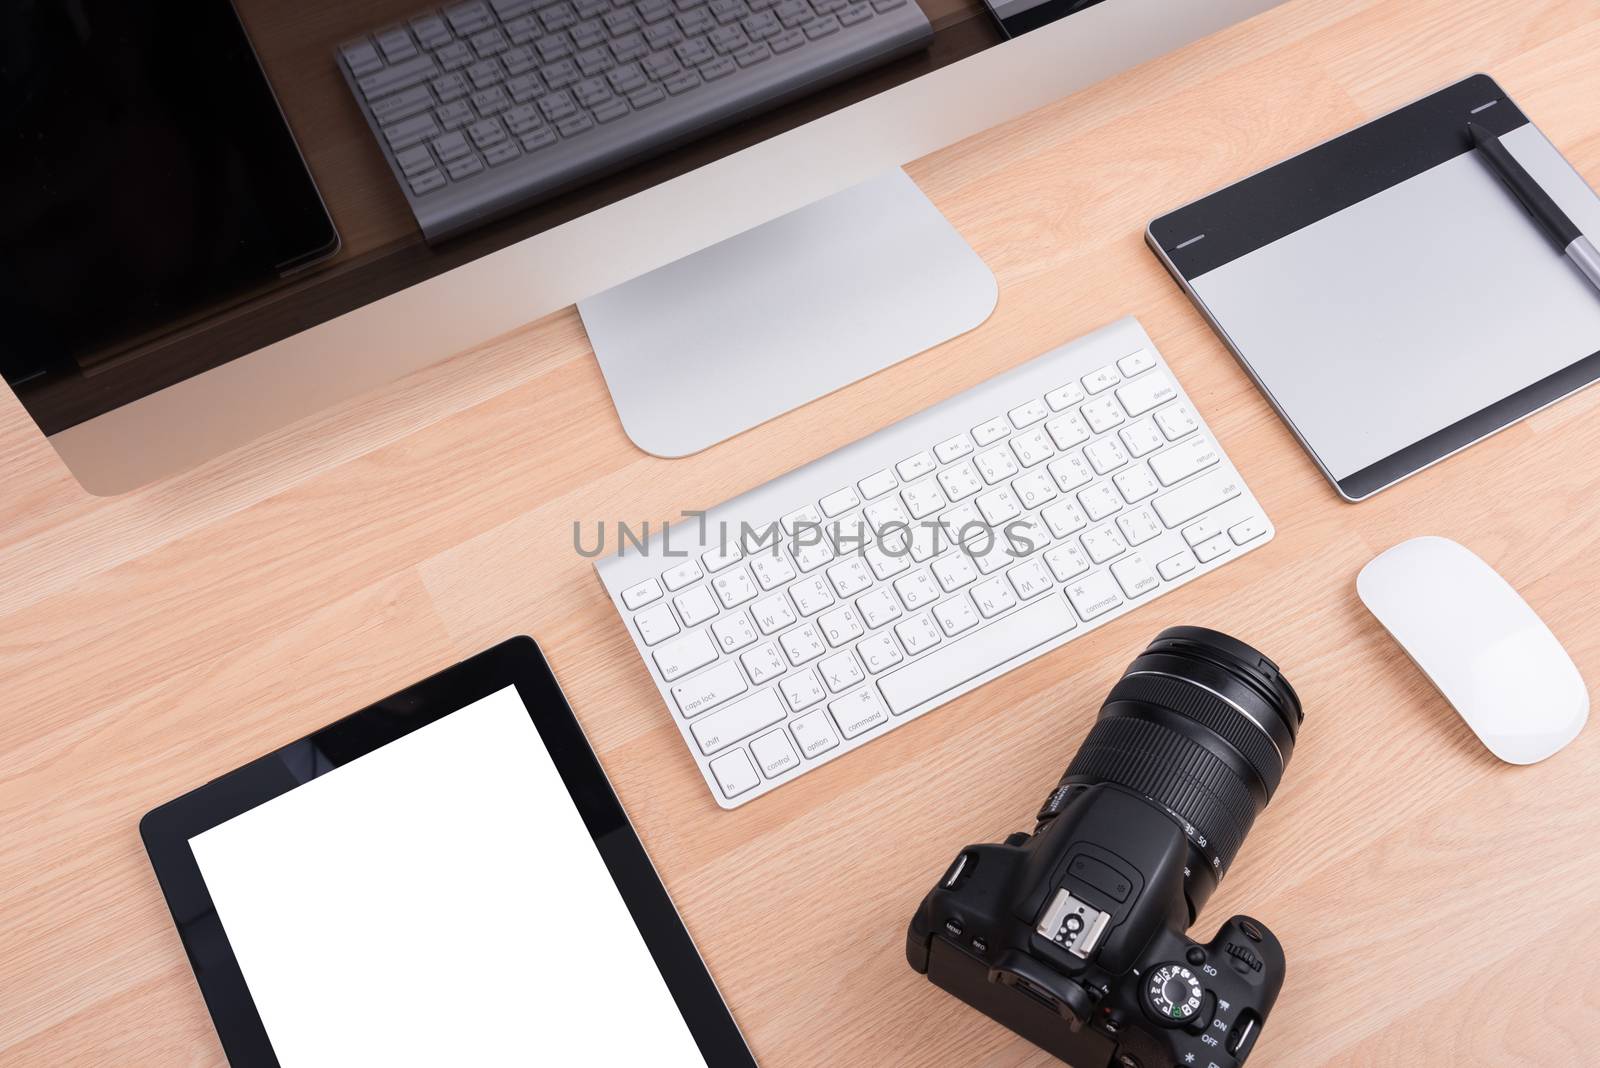 DSLR digital camera with tablet and computer PC on wooden dask table